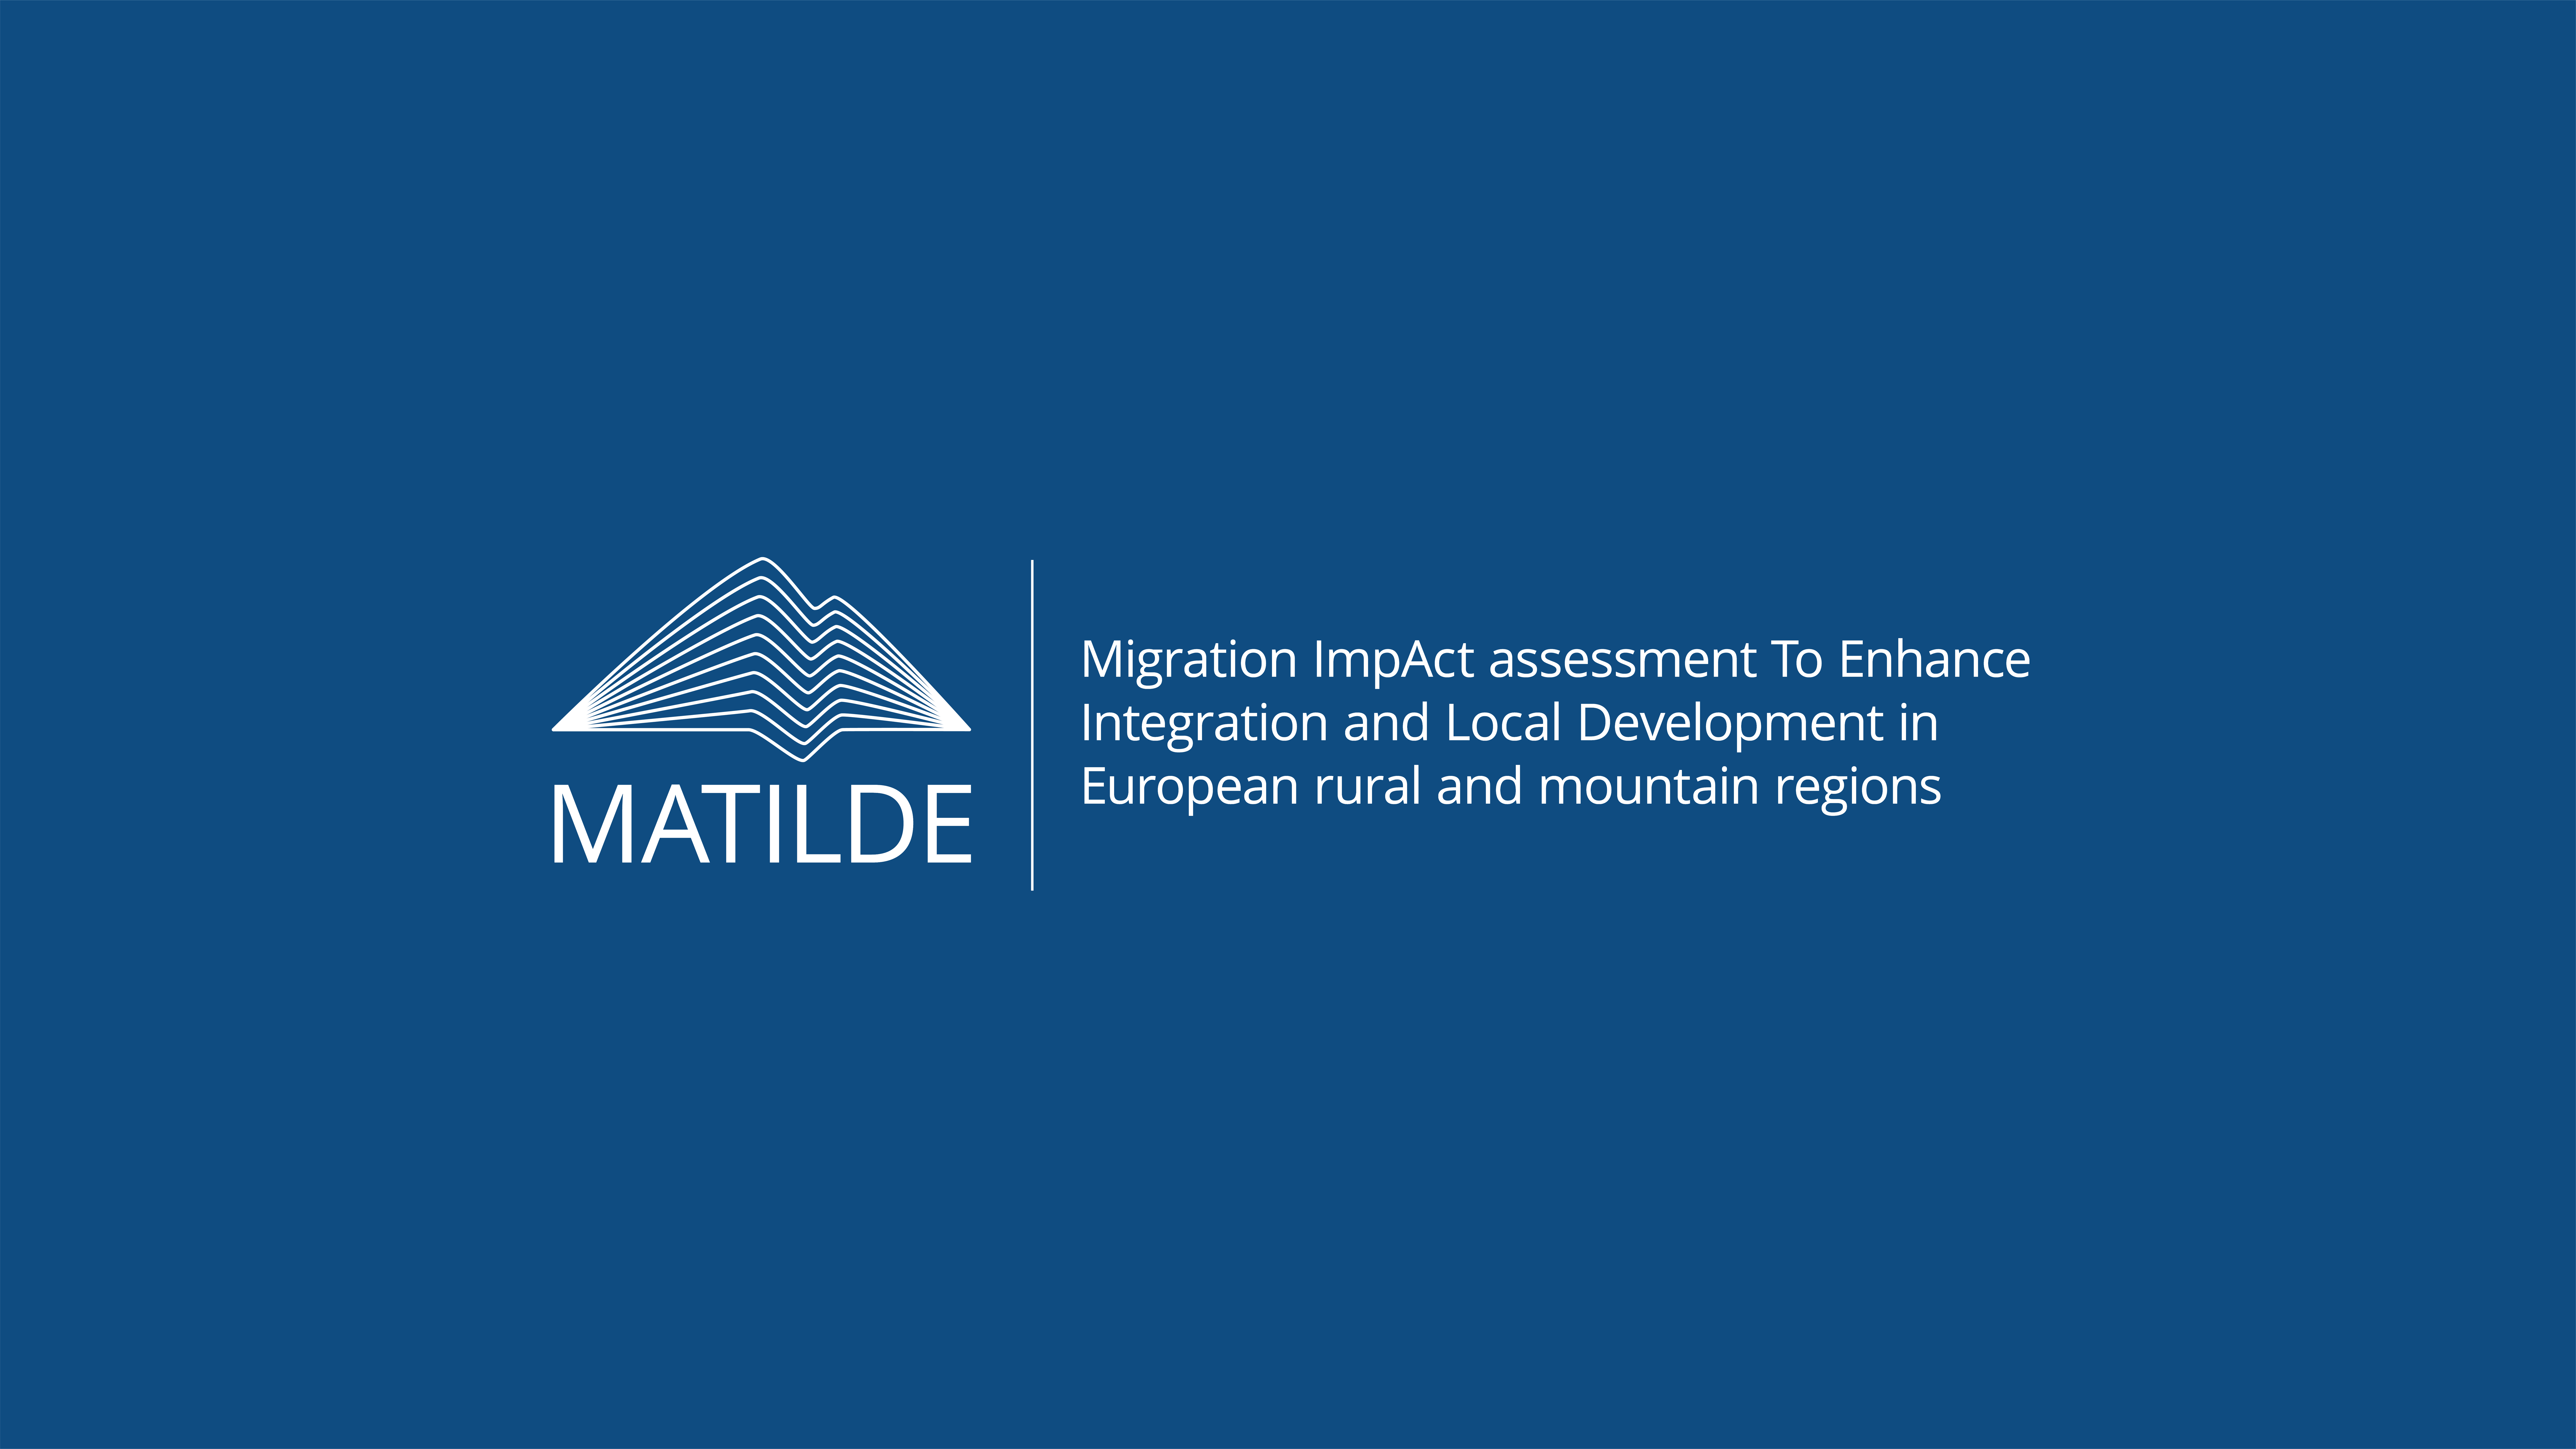 MATILDE project is funded by the European Union's H2020 Program